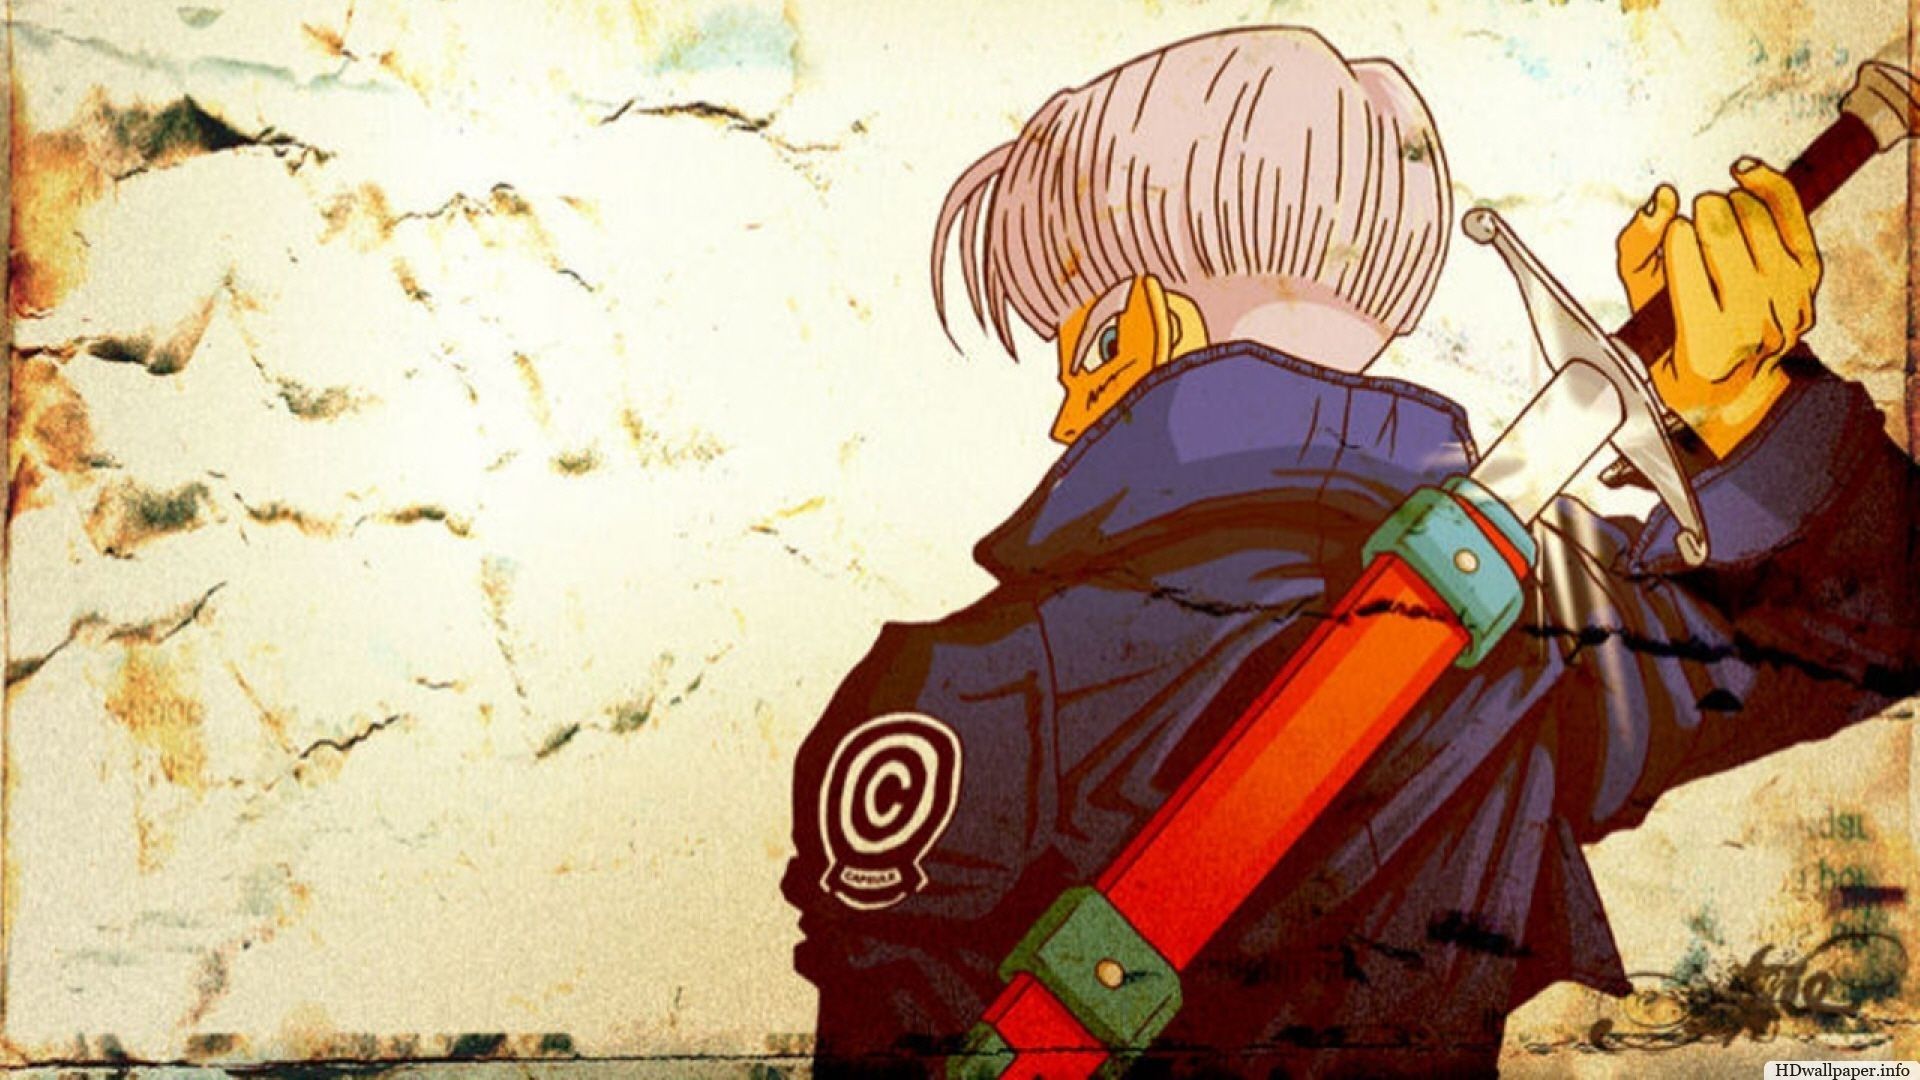 10 Best Dragon Ball Z Trunks Wallpapers FULL HD 1080p For PC Backgrounds.